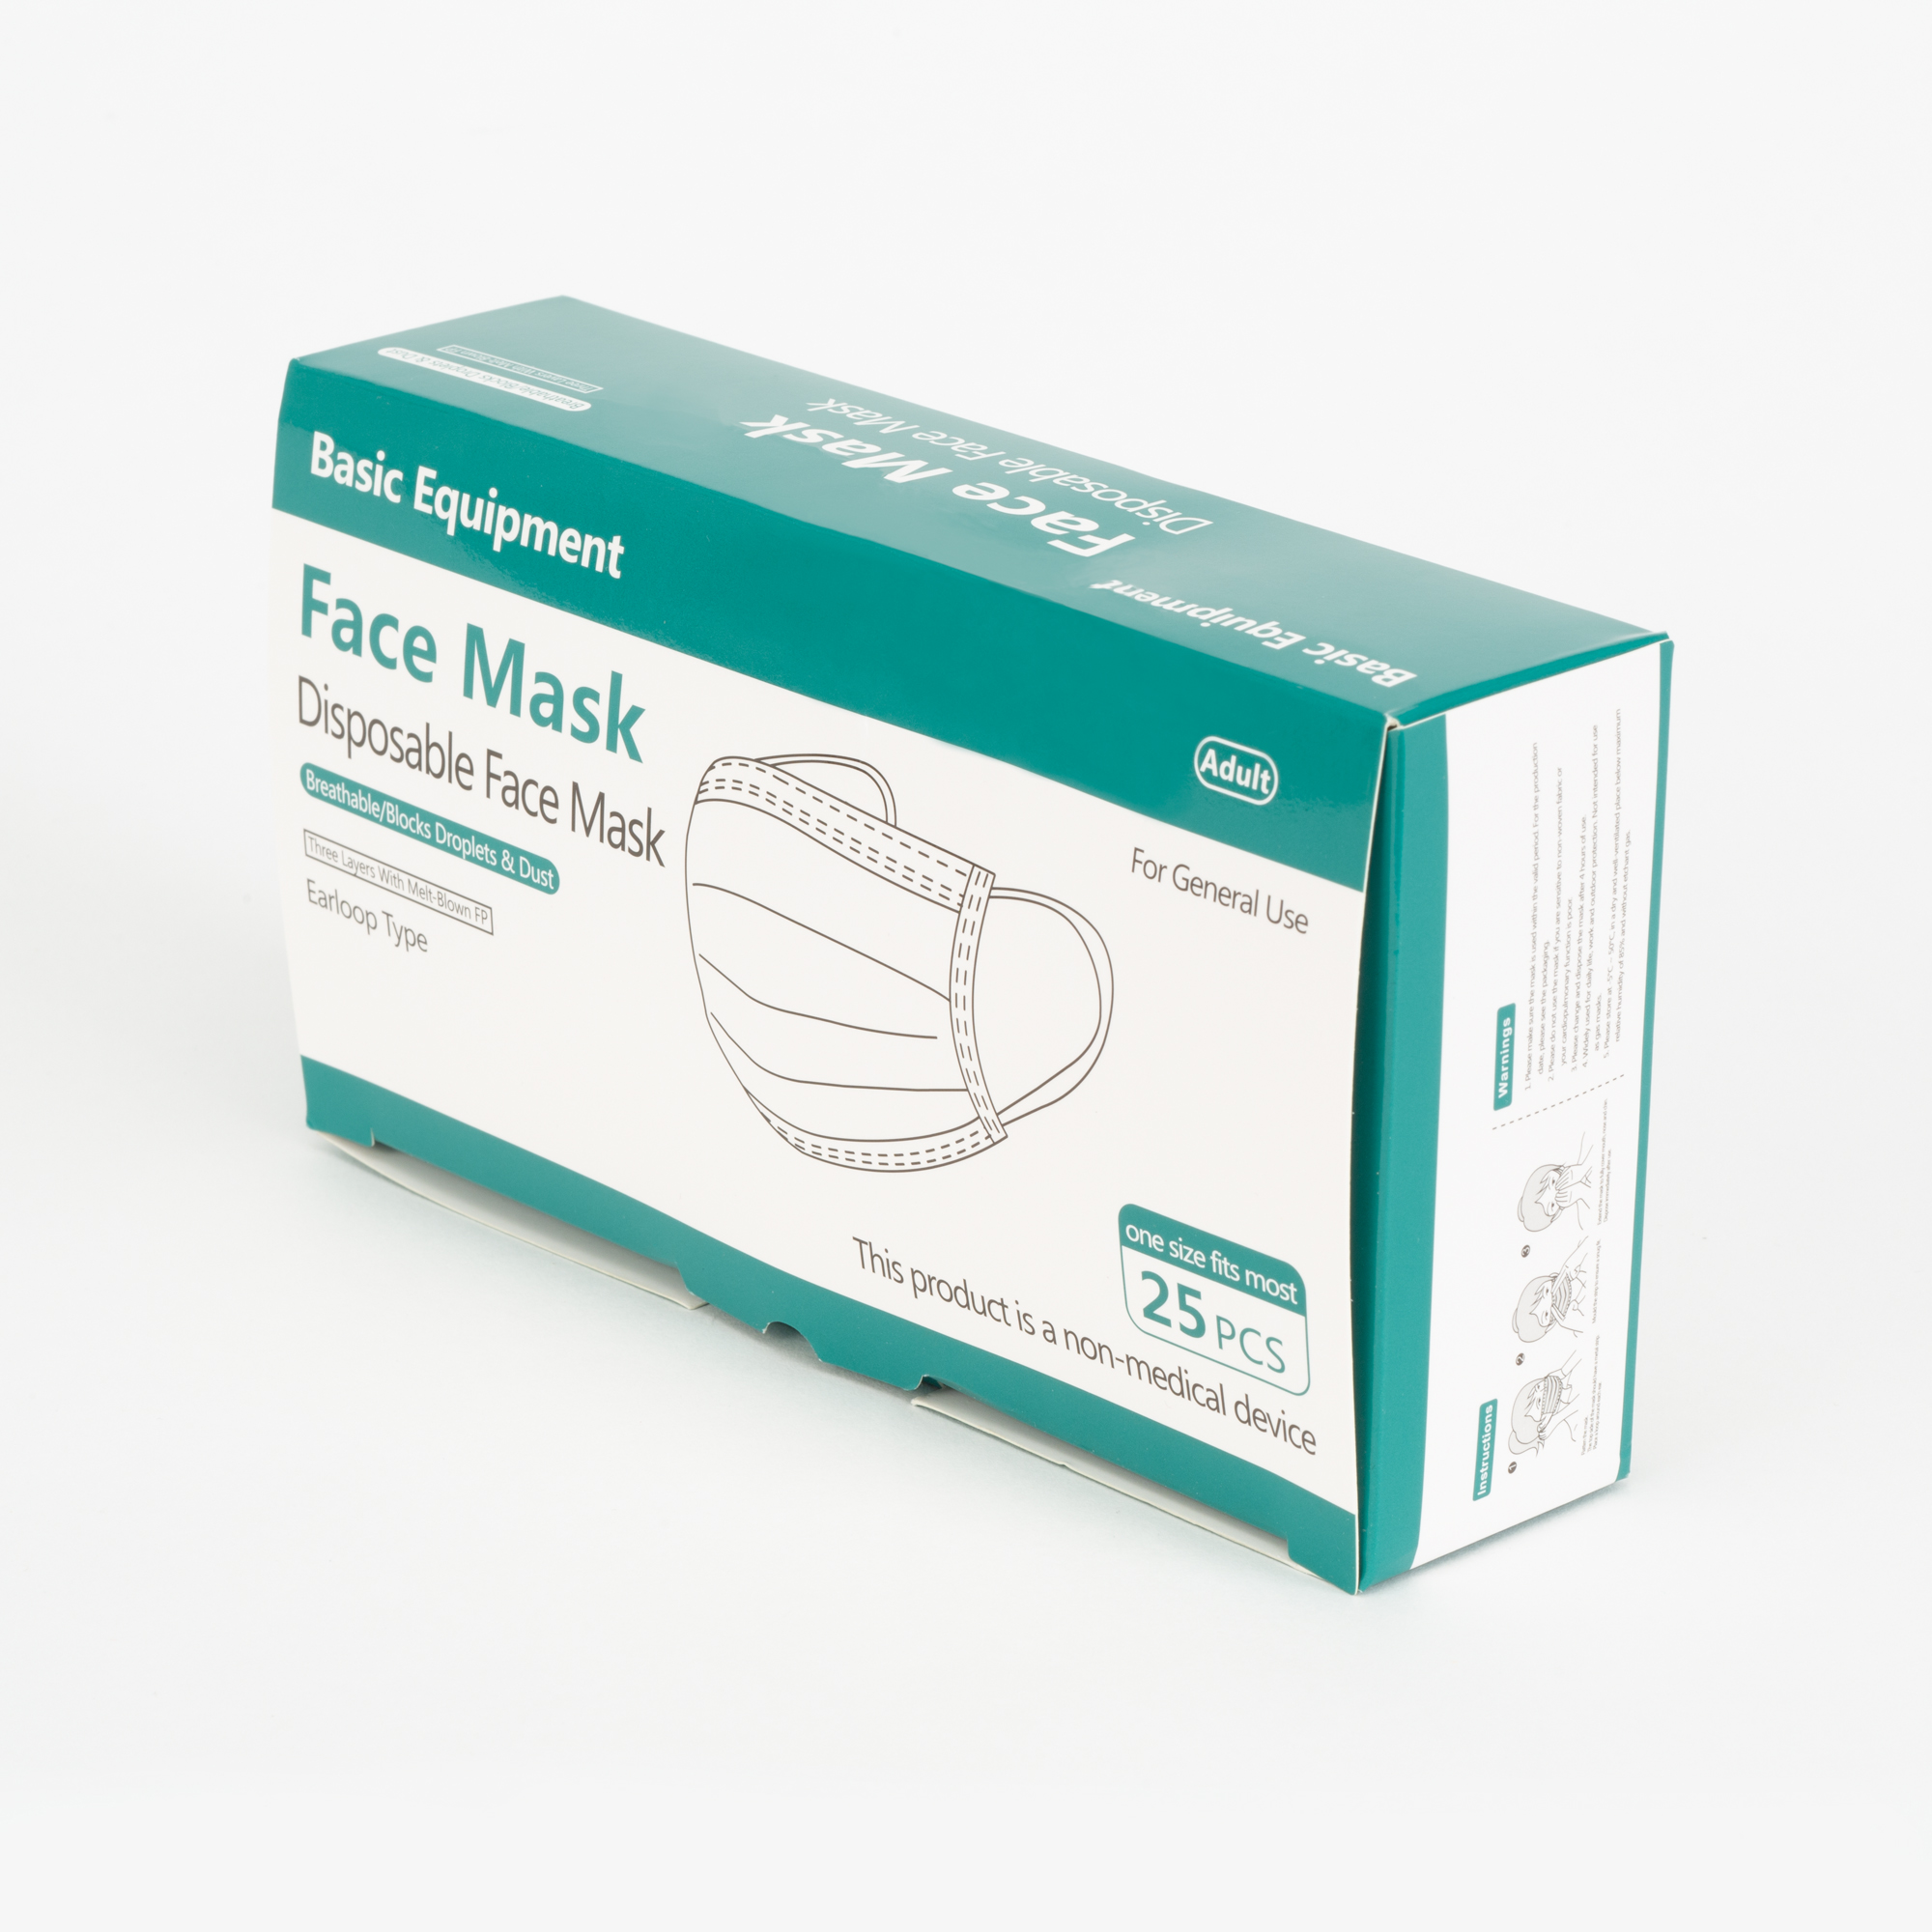 Basic Equipment Disposable Earloop Face Masks, 25 Count - image 2 of 7